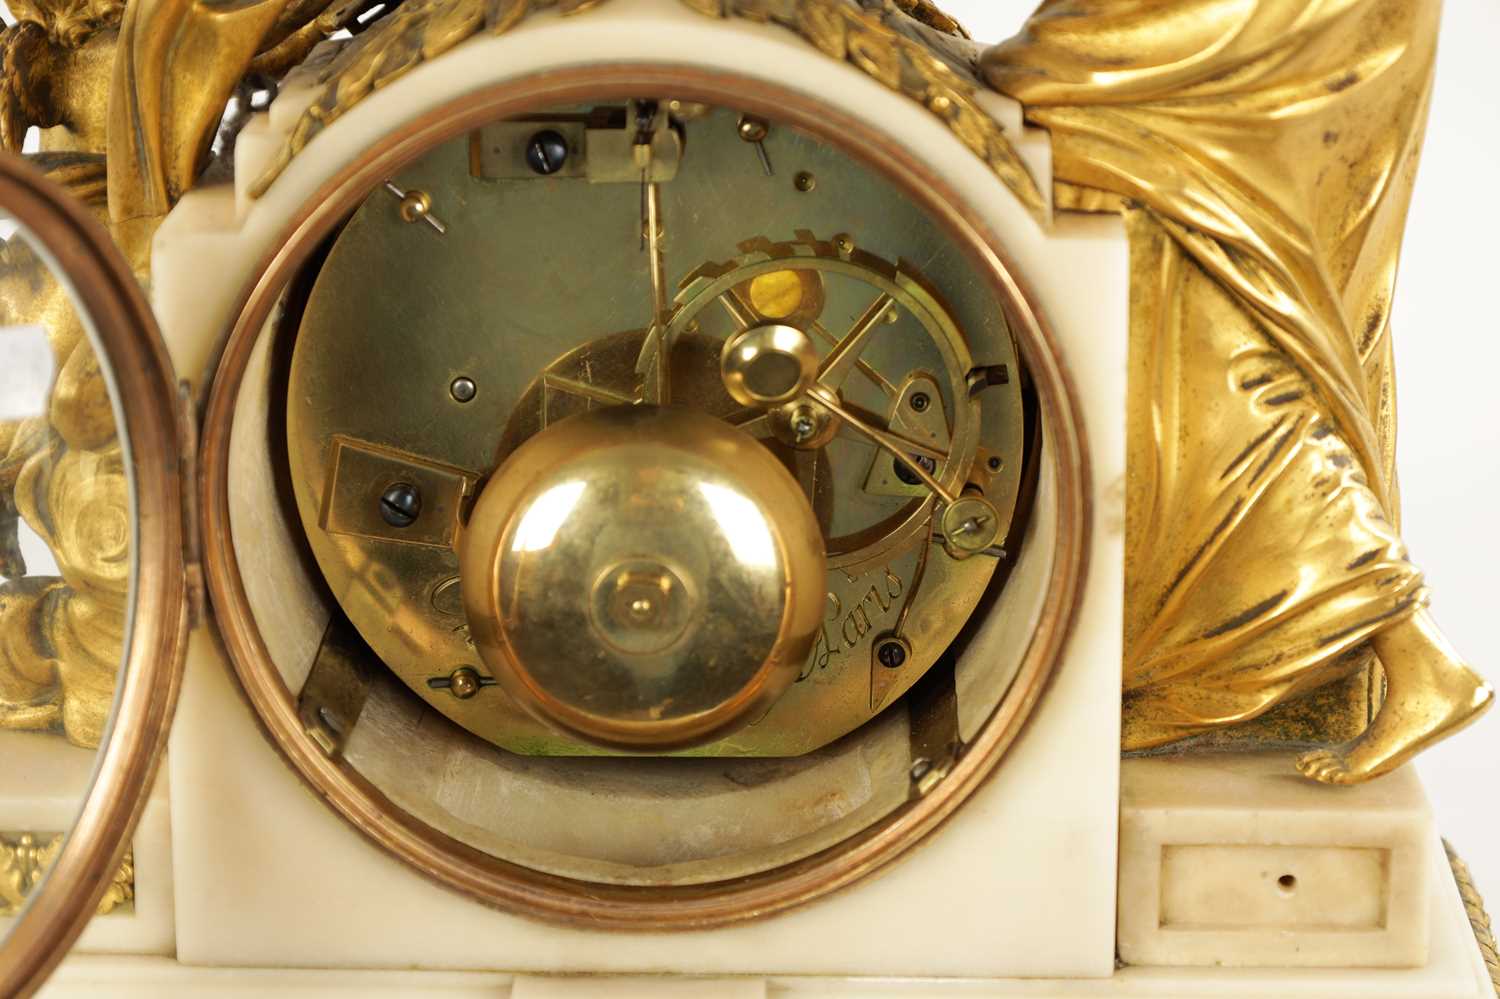 CHARLES LEROY, A PARIS. A FRENCH LOUIS XVI ORMOLU AND MARBLE FIGURAL MANTEL CLOCK - Image 9 of 11